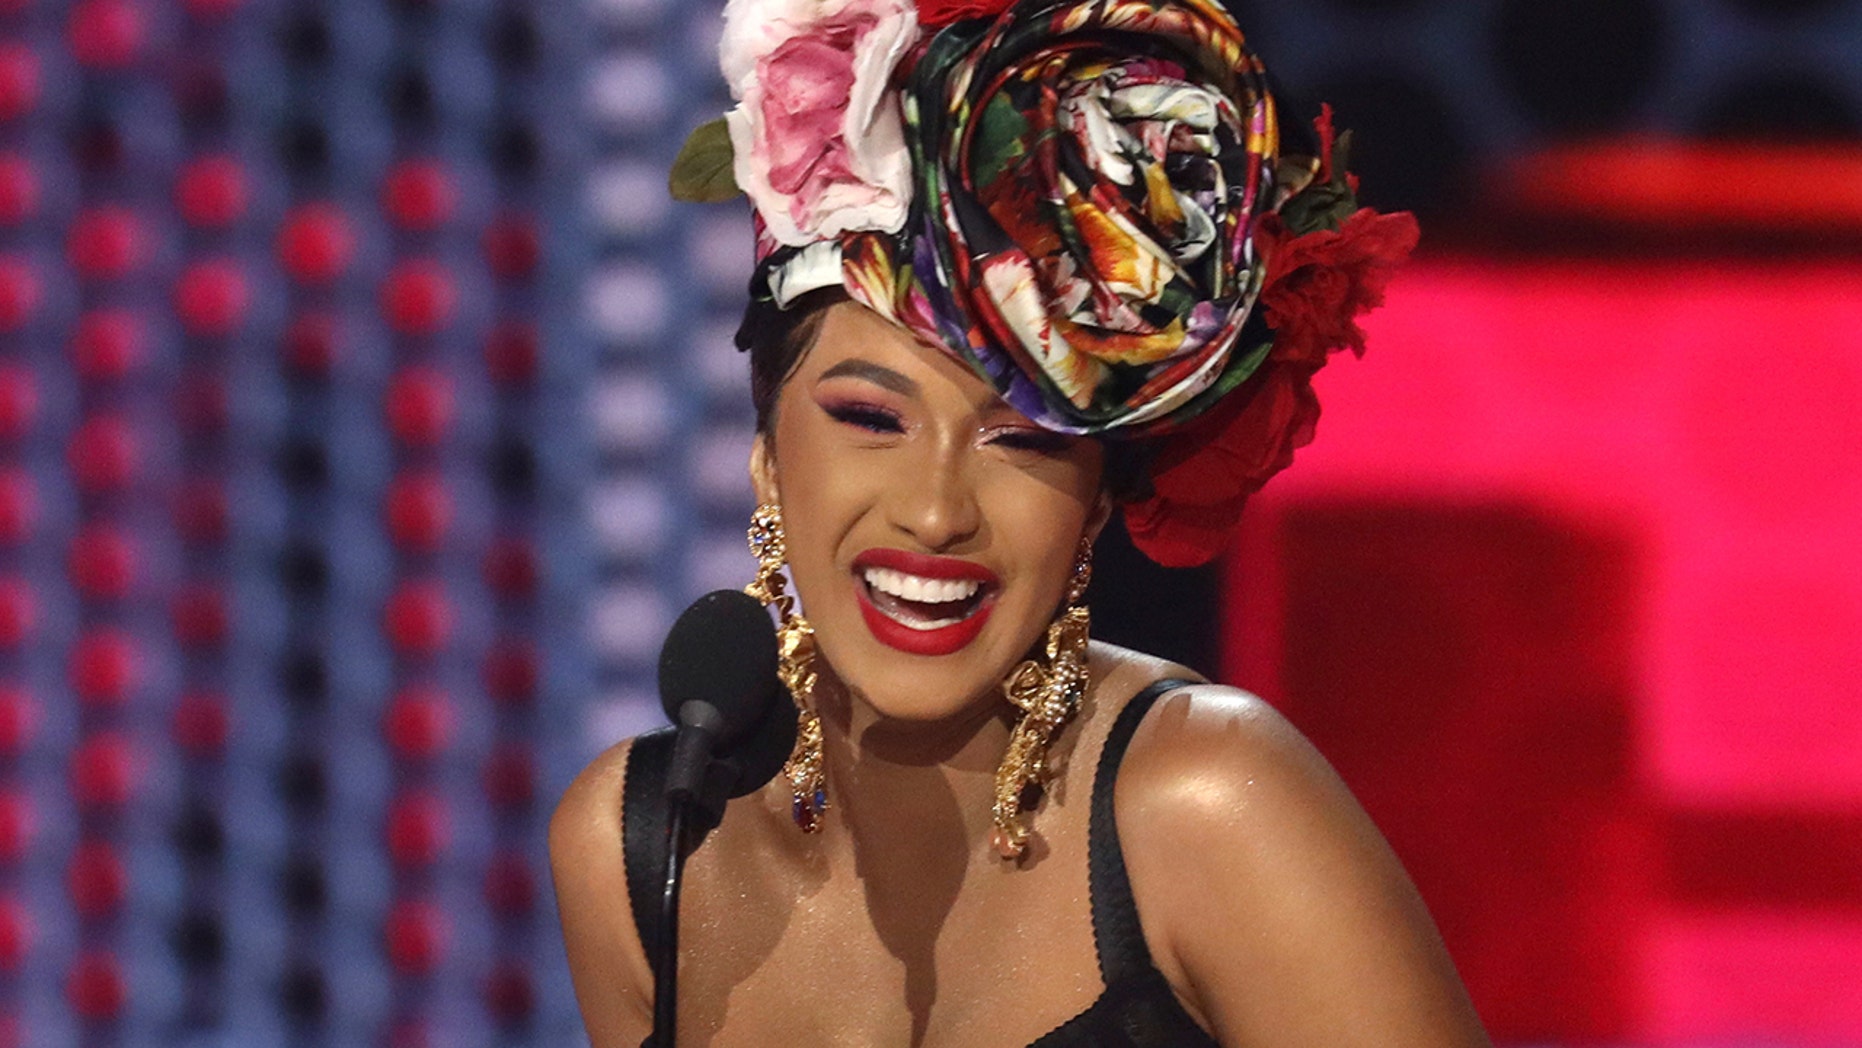 Cardi B accepts the award of the favorite rap / hip-hop artist at the American Music Awards on Tuesday, October 9, 2018 at the Microsoft Theater in Los Angeles.